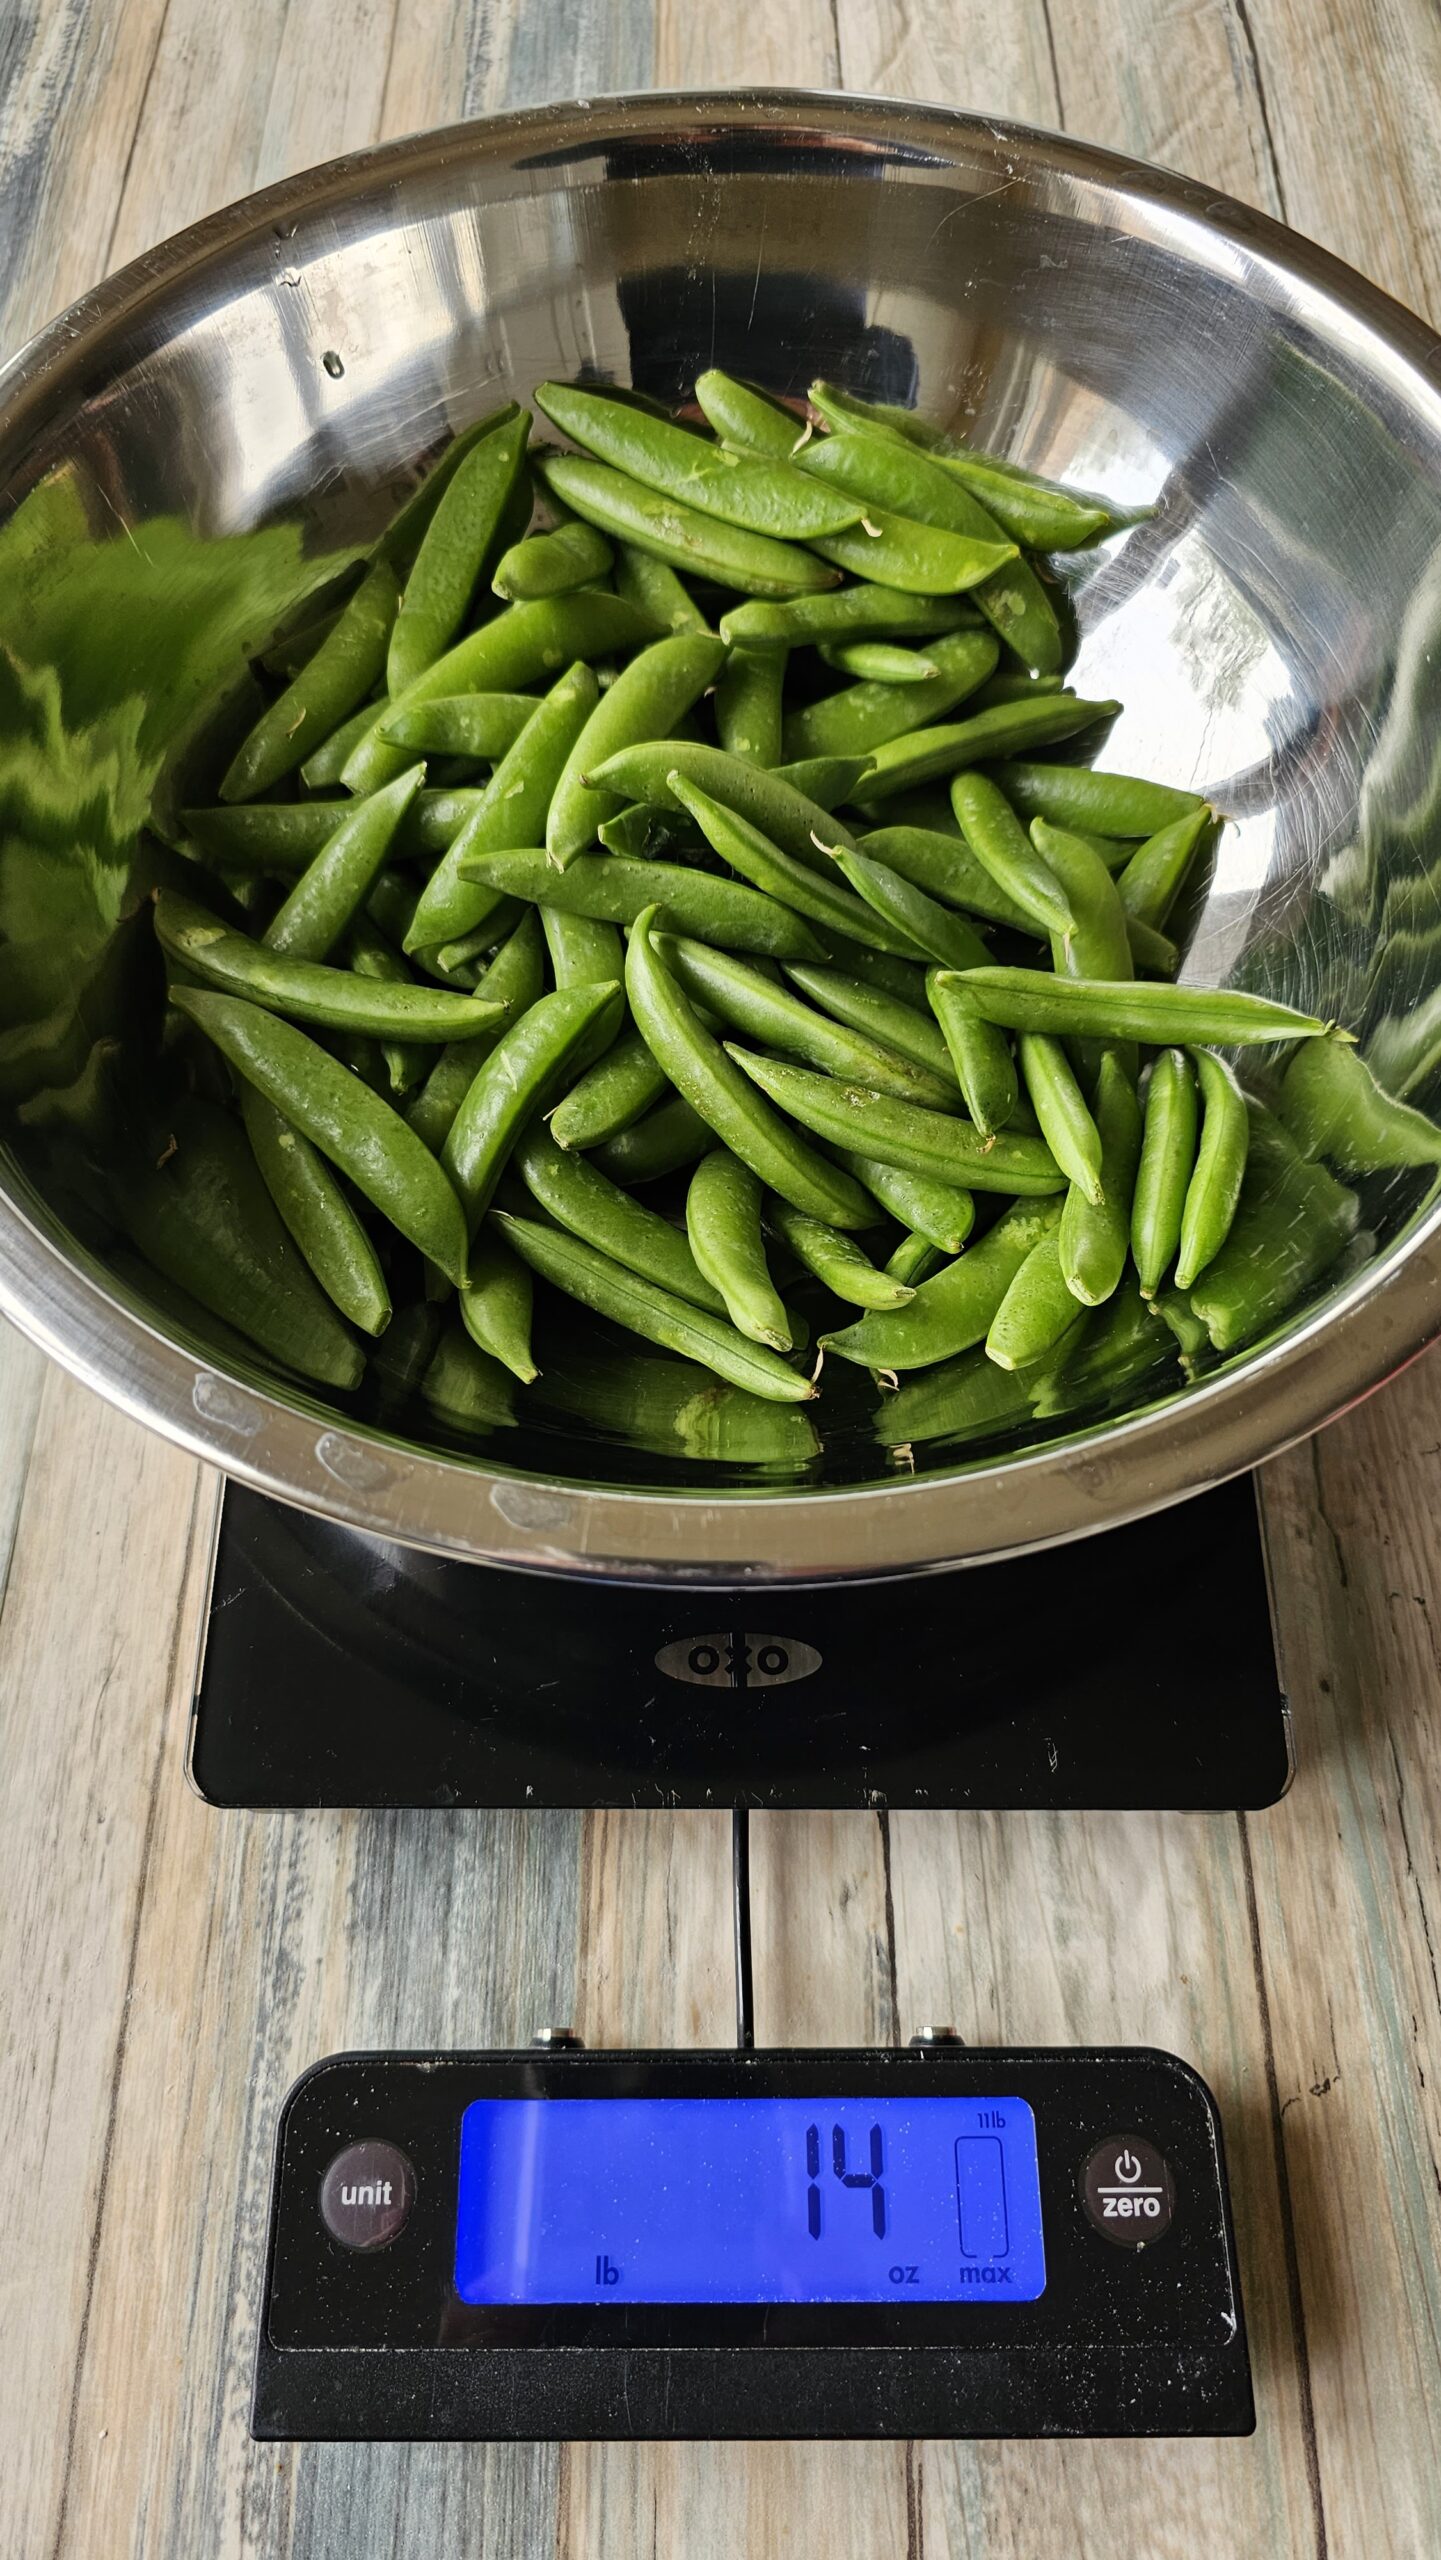 Weighing Sugar Snap Peas on an OXO scale